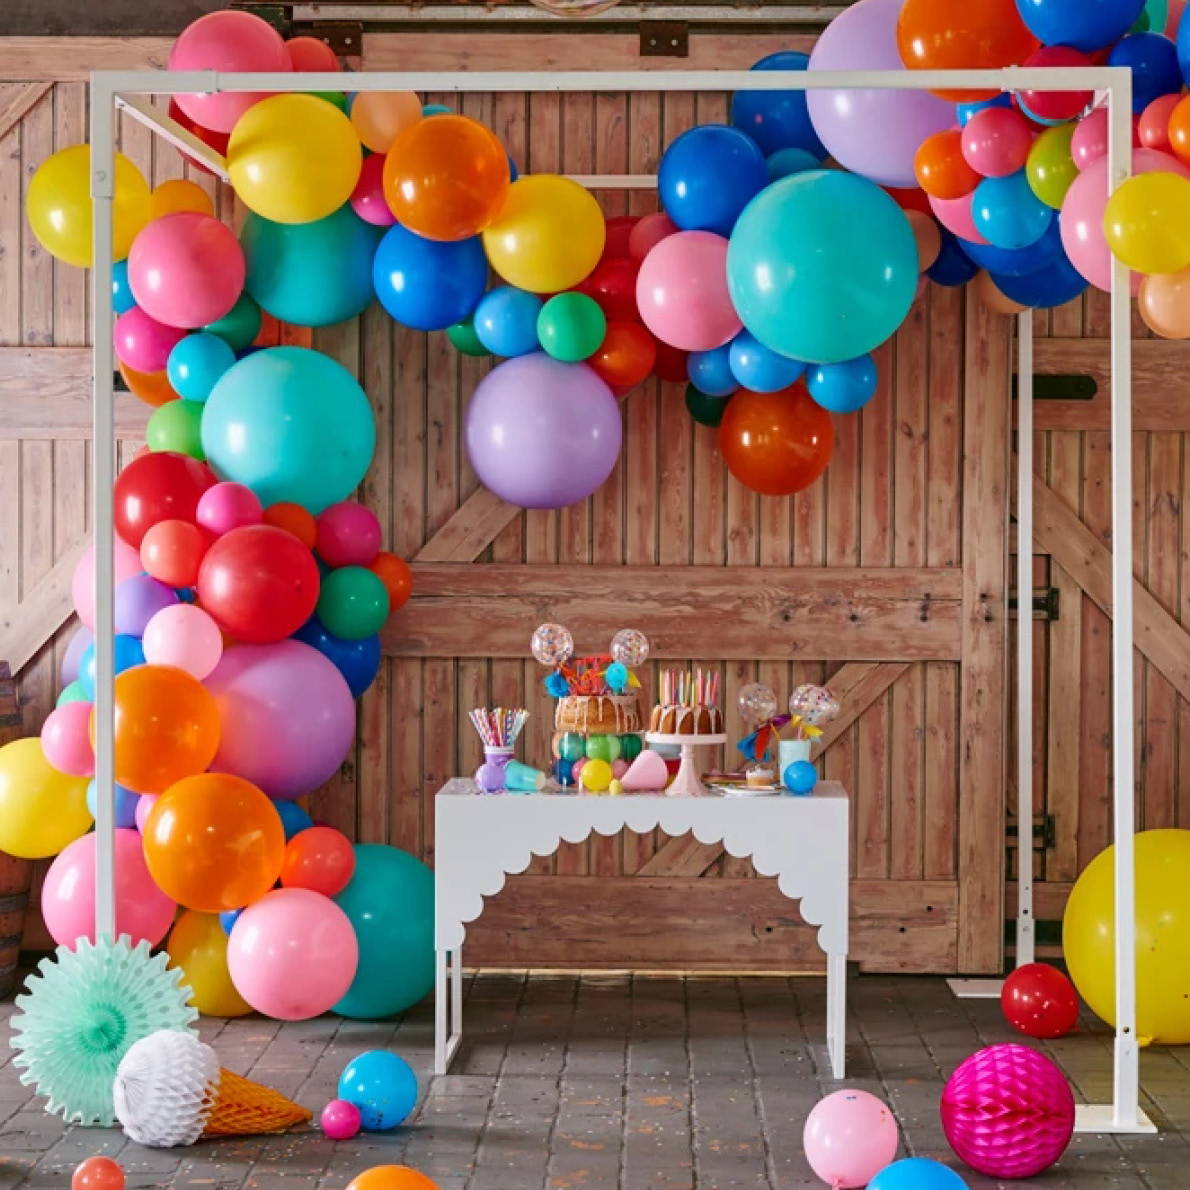 Image of balloon display around small party table.